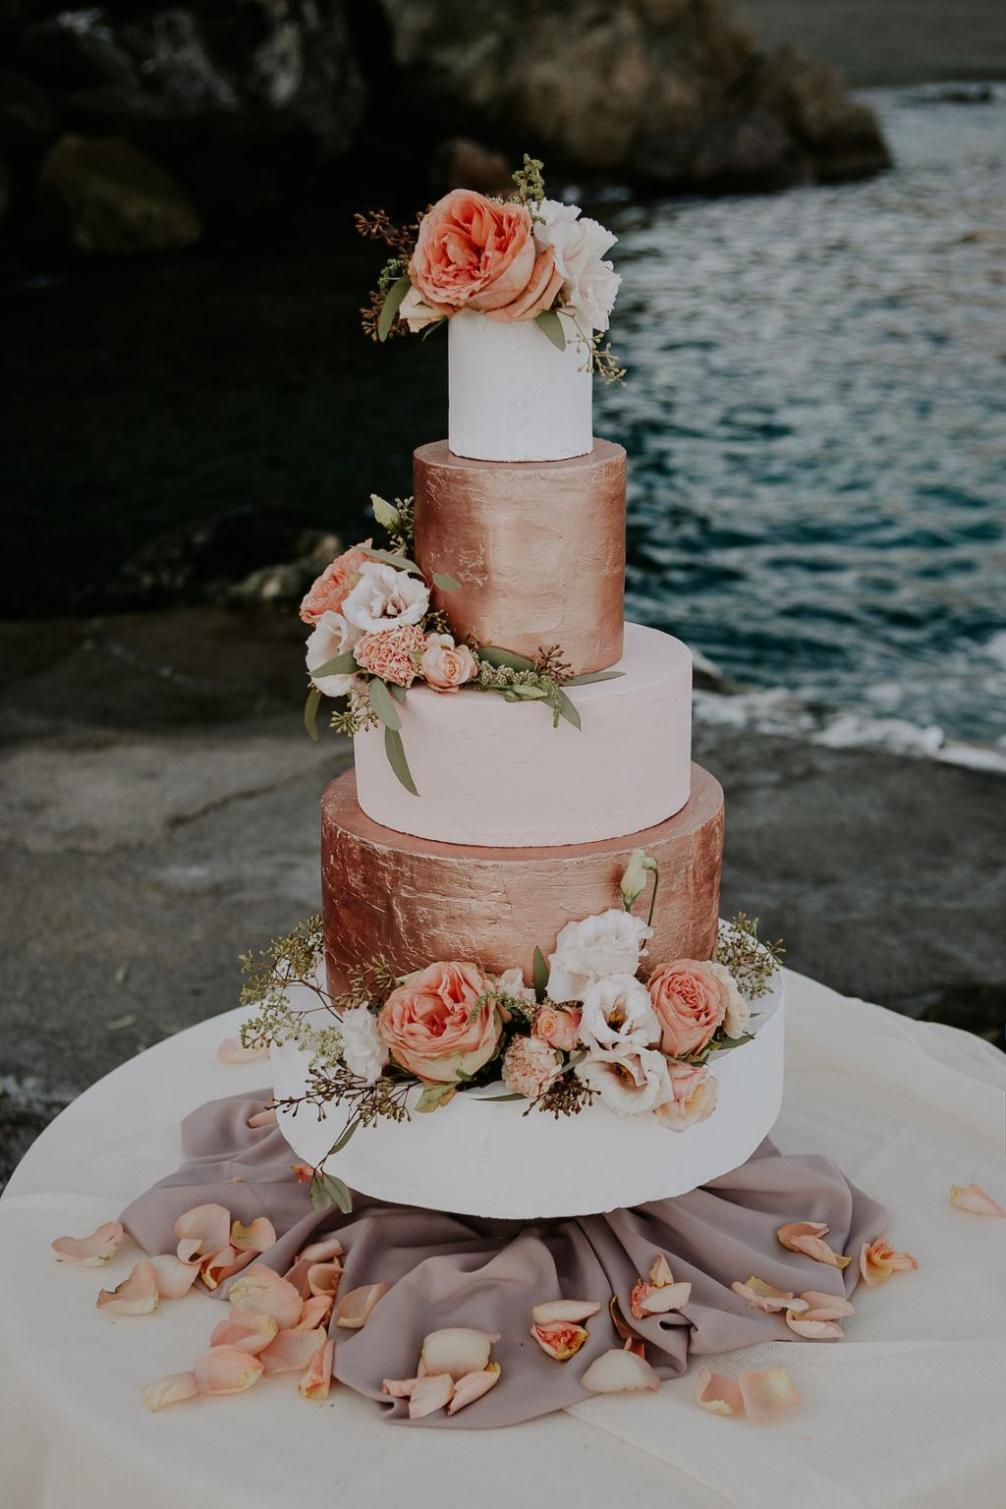 How to Choose the Perfect Wedding Cake for My Venue and Theme?